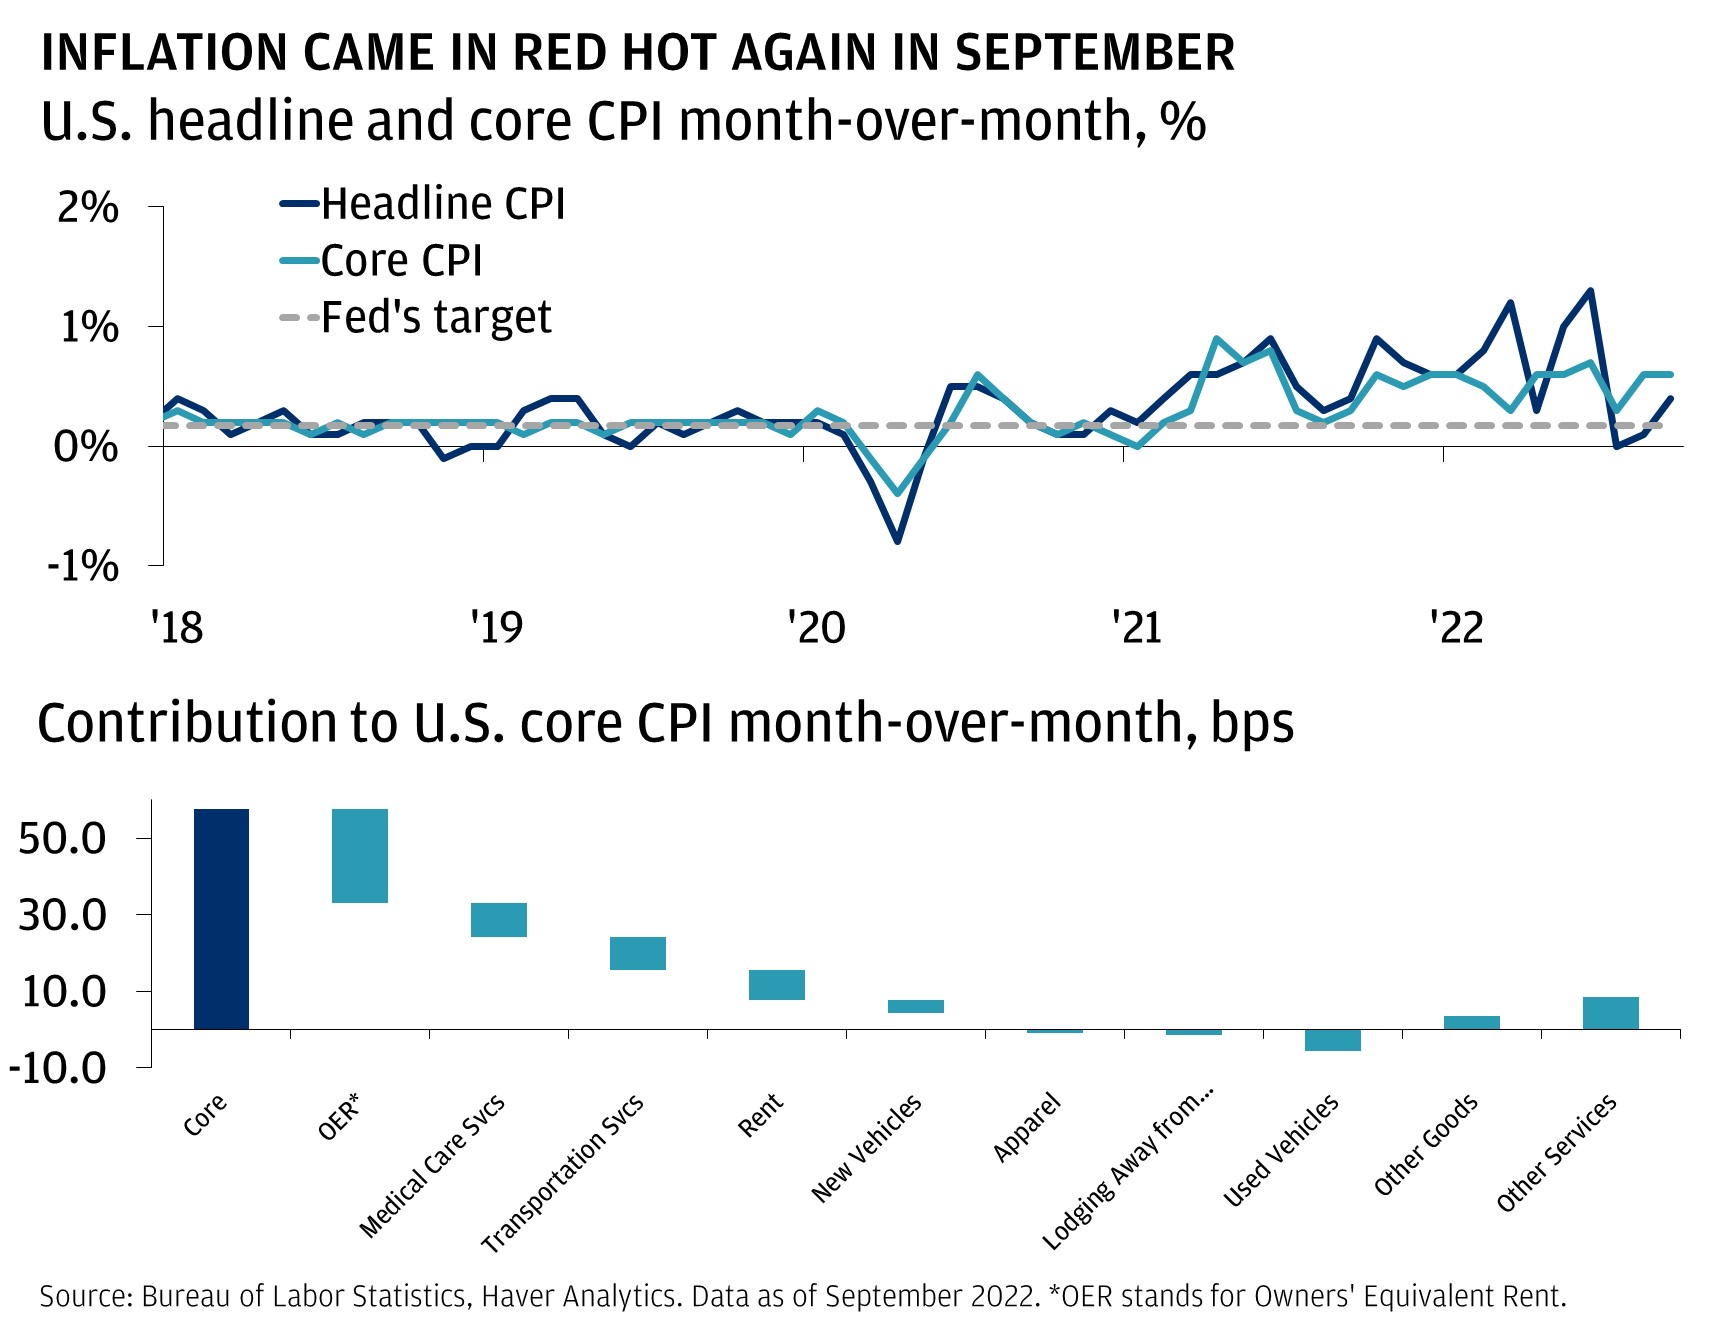 The top chart shows the month-over-month change in U.S. headline CPI, core CPI, and the level which is consistent with the Fed’s 2% inflation target from January 2018 to September 2022. The bottom chart shows the contribution to the month-over-month change in core CPI for September.